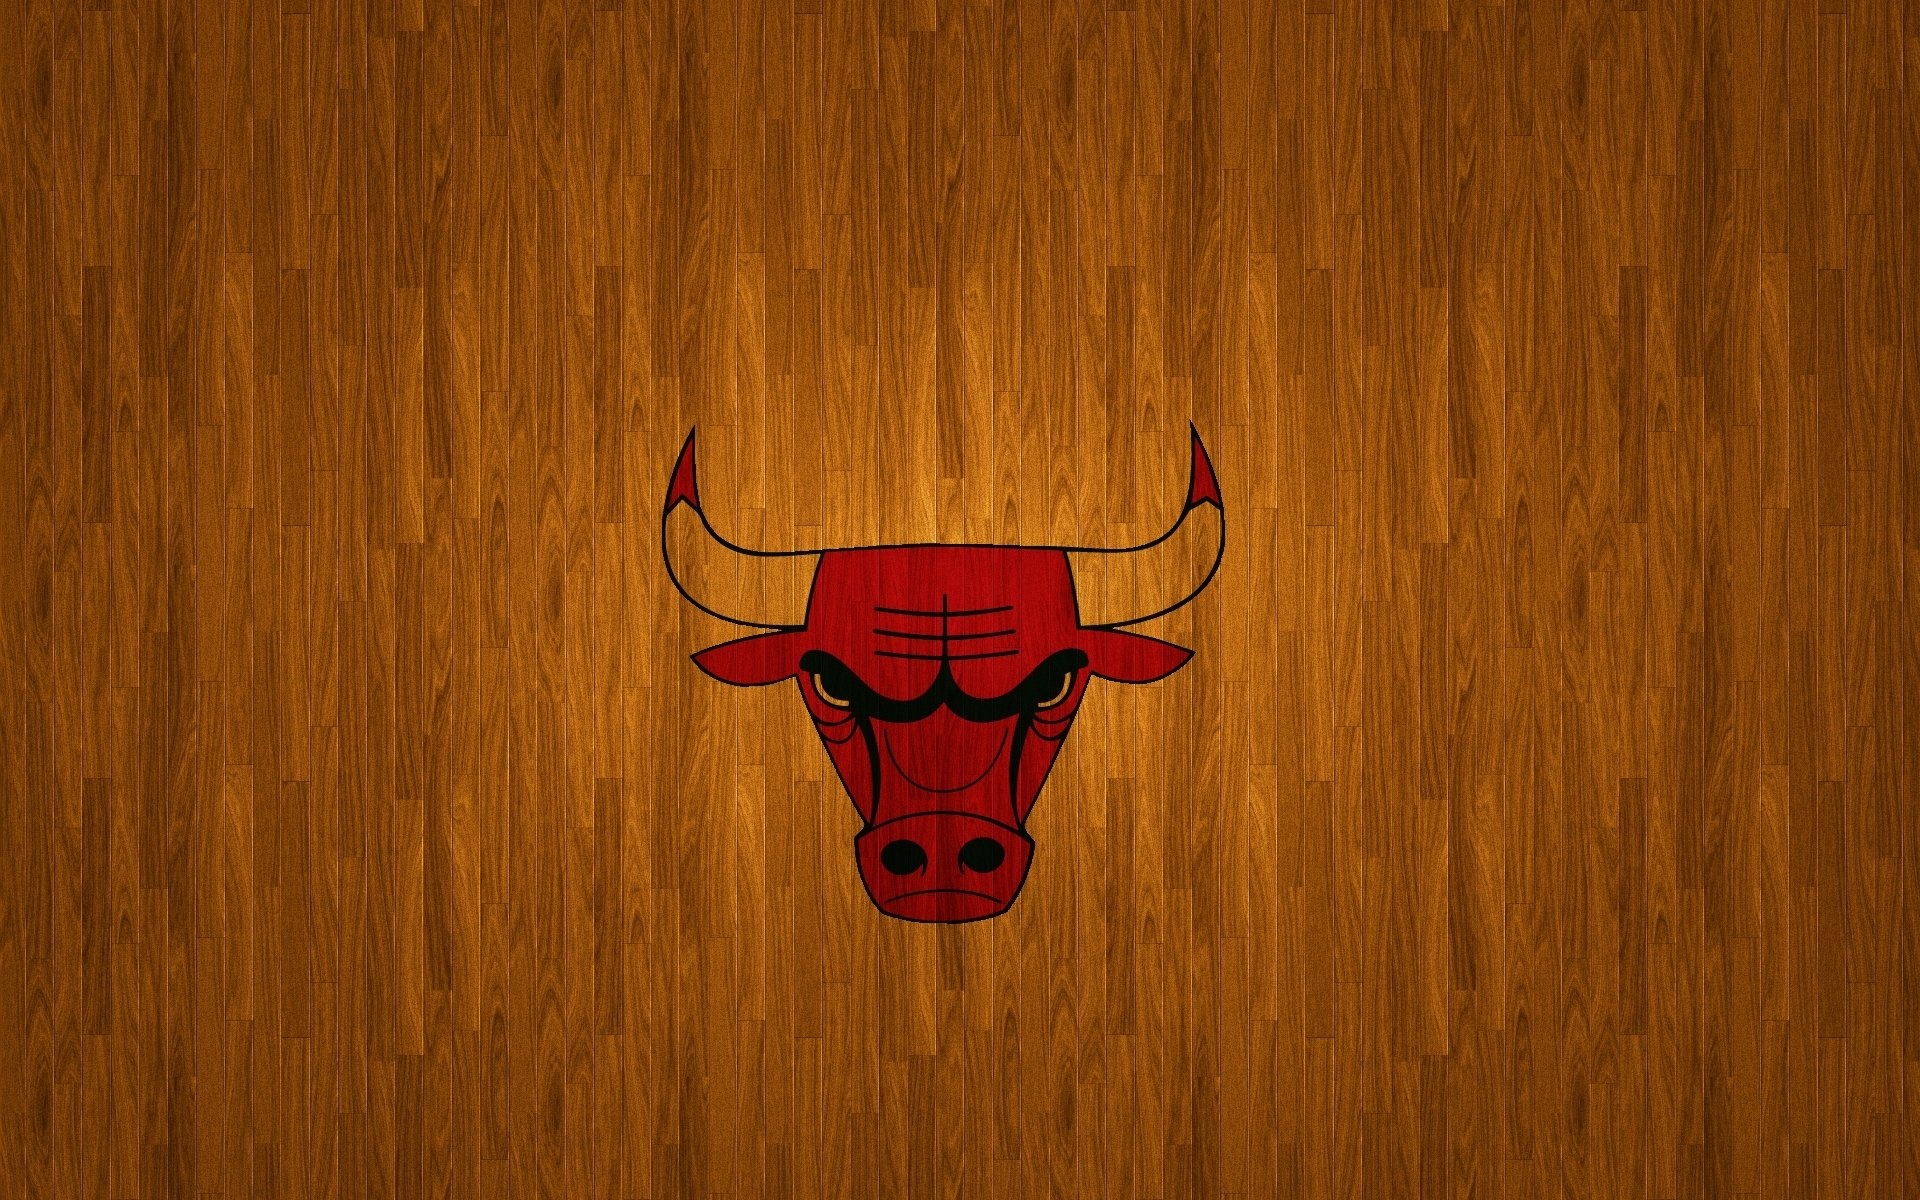 Chicago Bulls: The team lost the conference finals in 1975 to the Golden State Warriors. 1920x1200 HD Wallpaper.